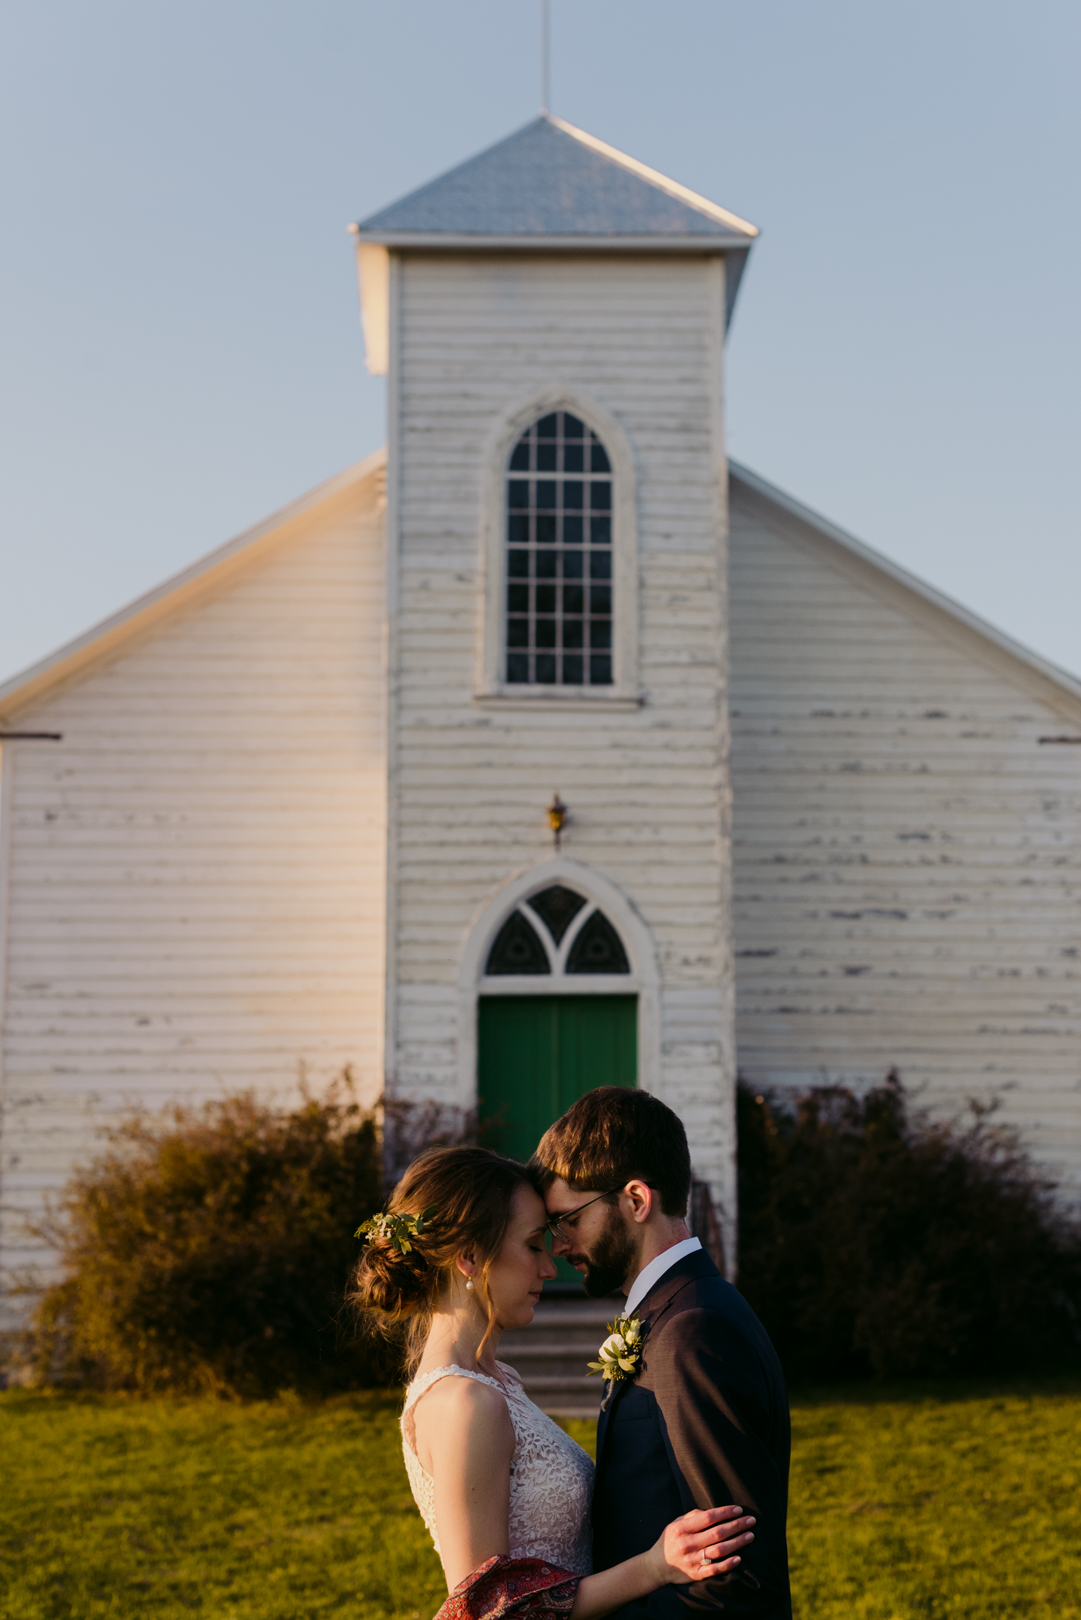 bride and groom in front of old church at sunset